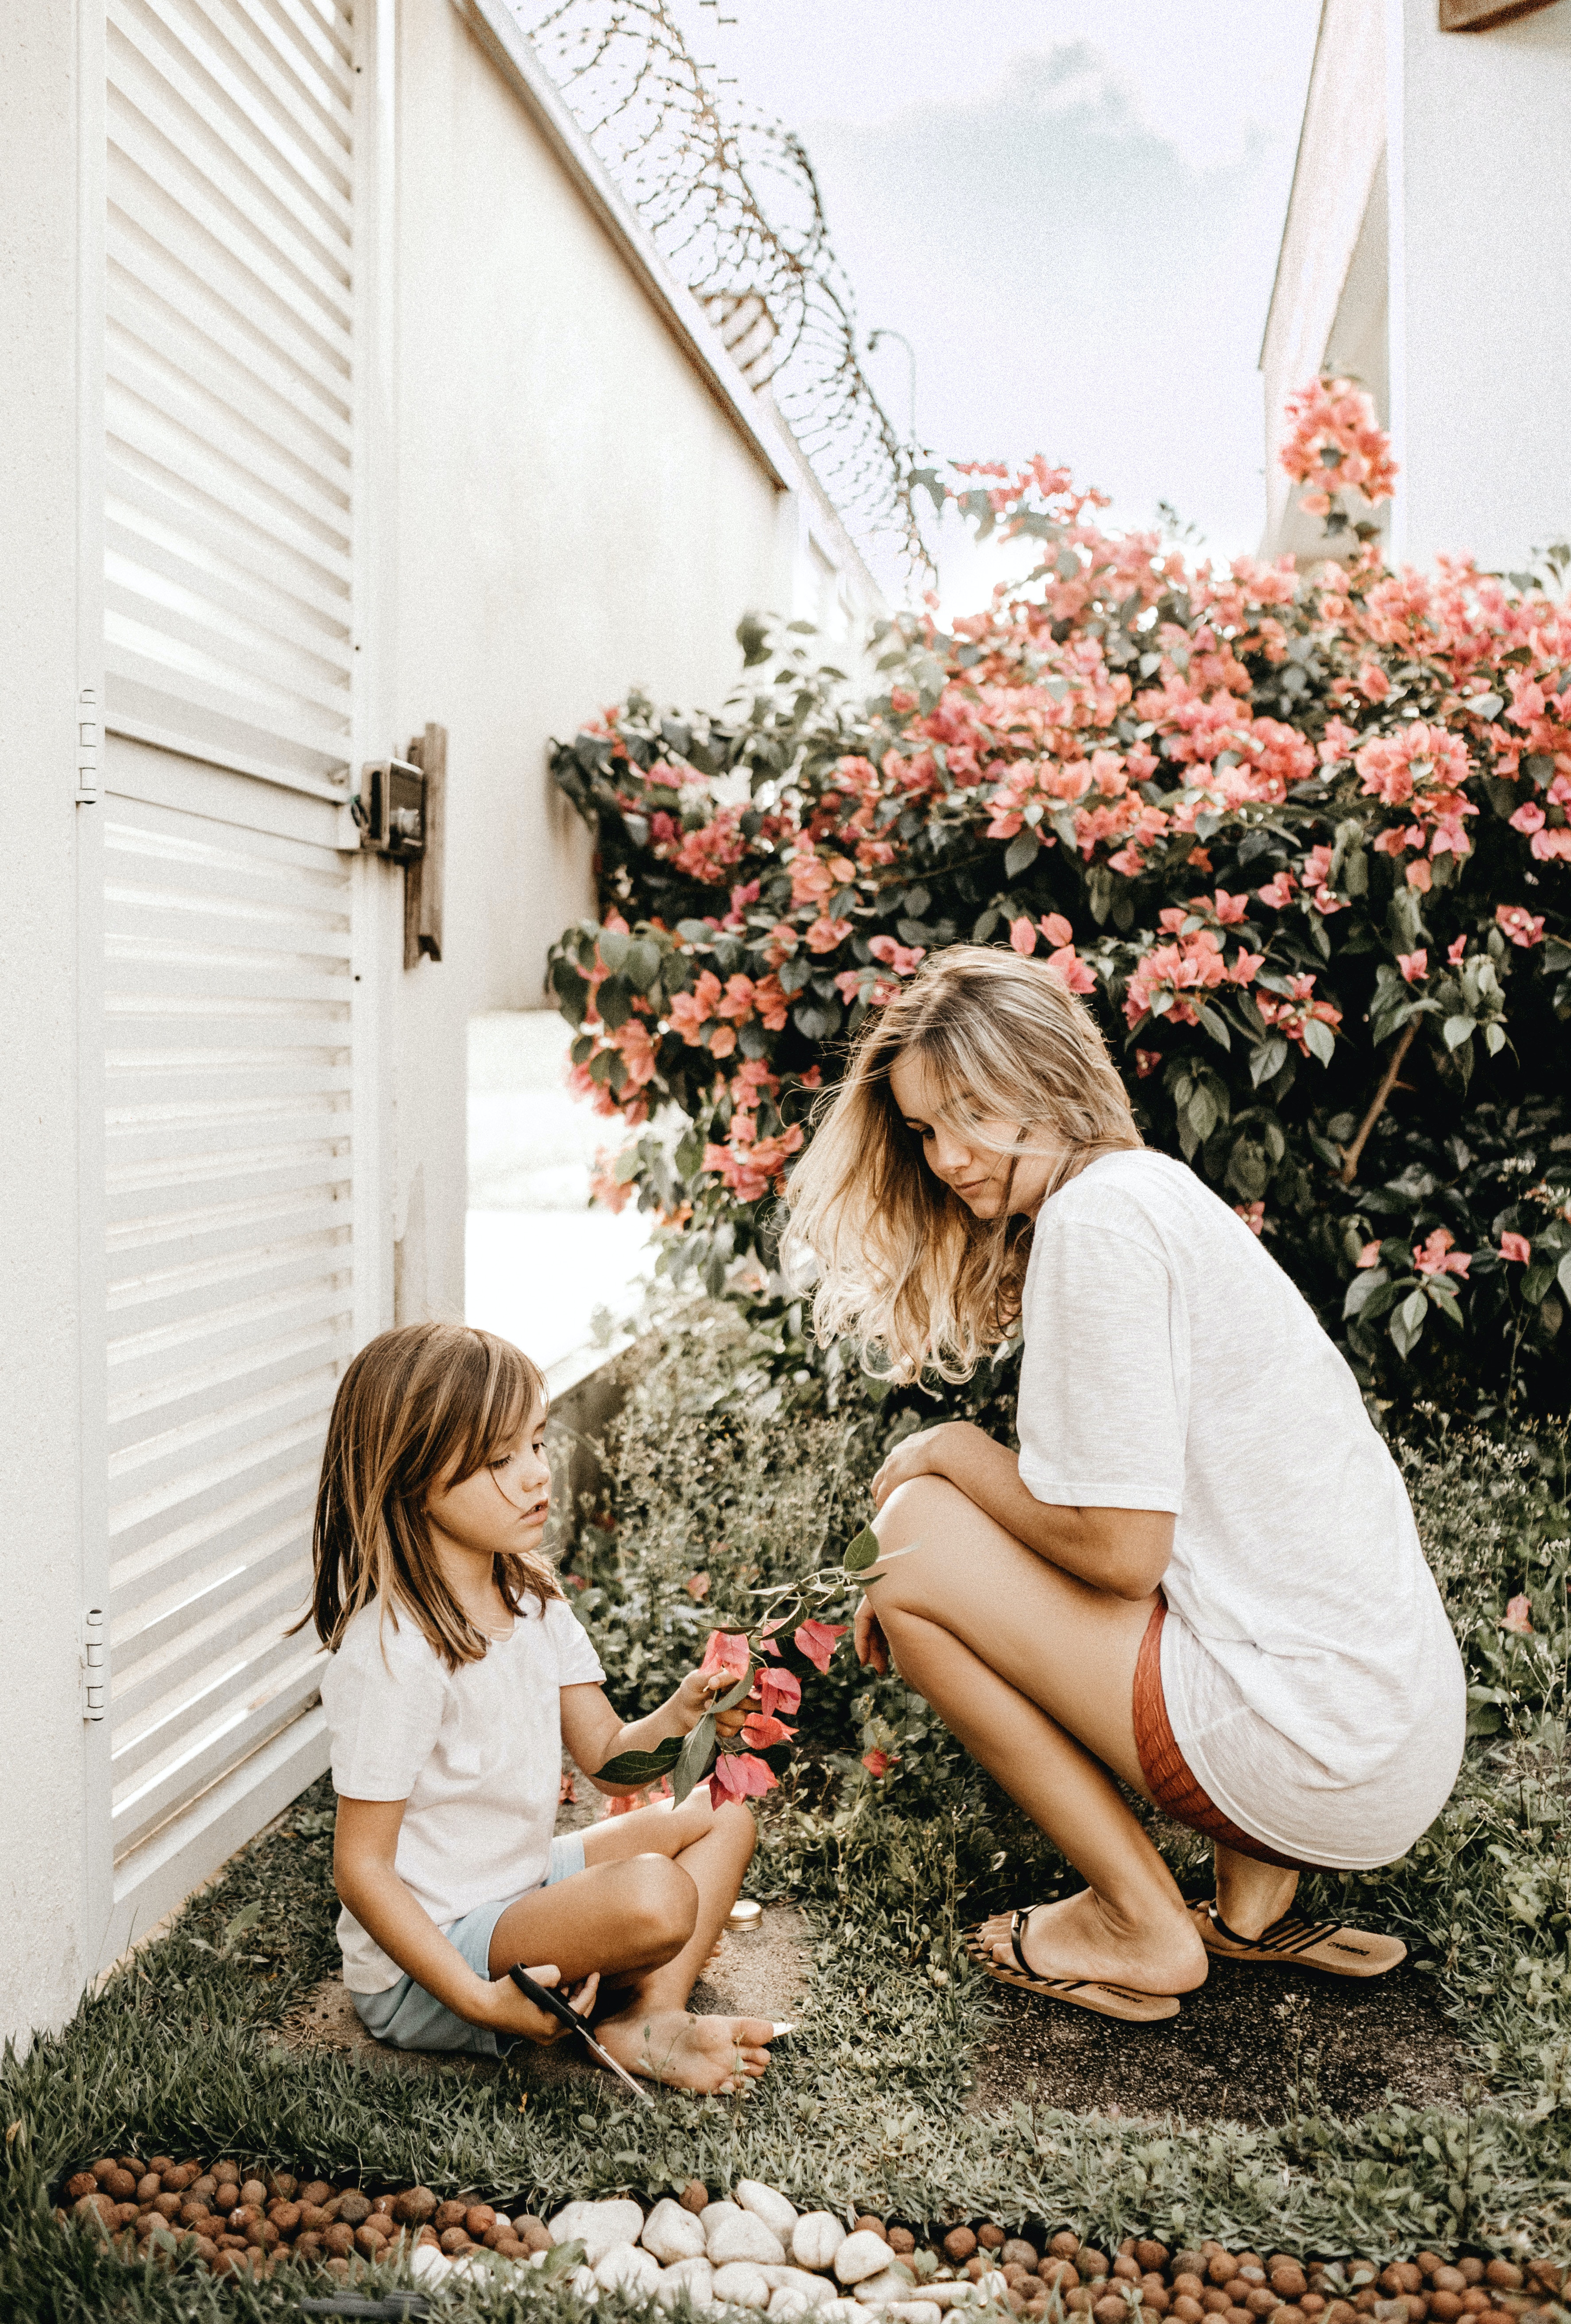 Mother and daughter in garden; image by Jonathan Borba, via Pexels.com.